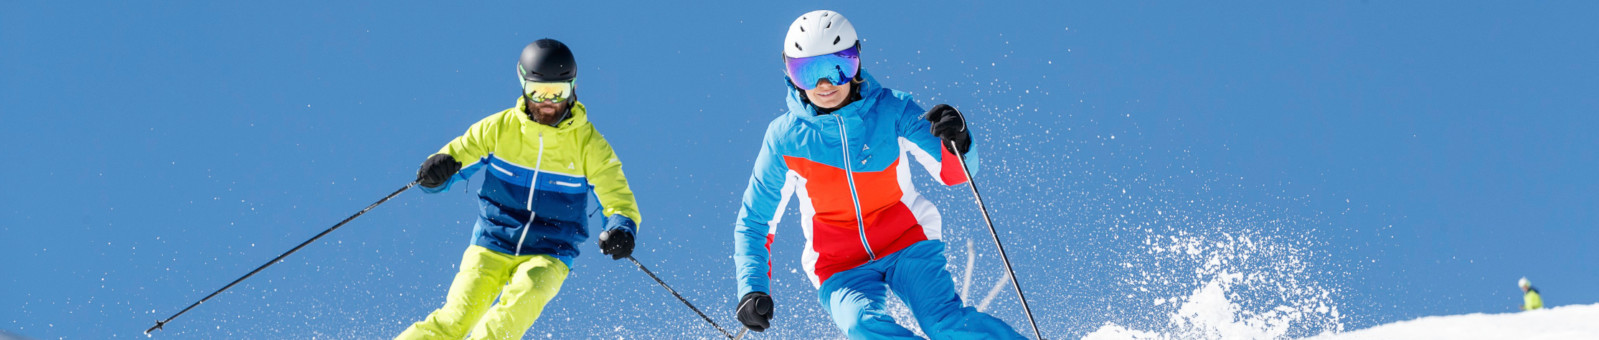     Hiring your skis right at the slopes with INTERSPORT Rent 